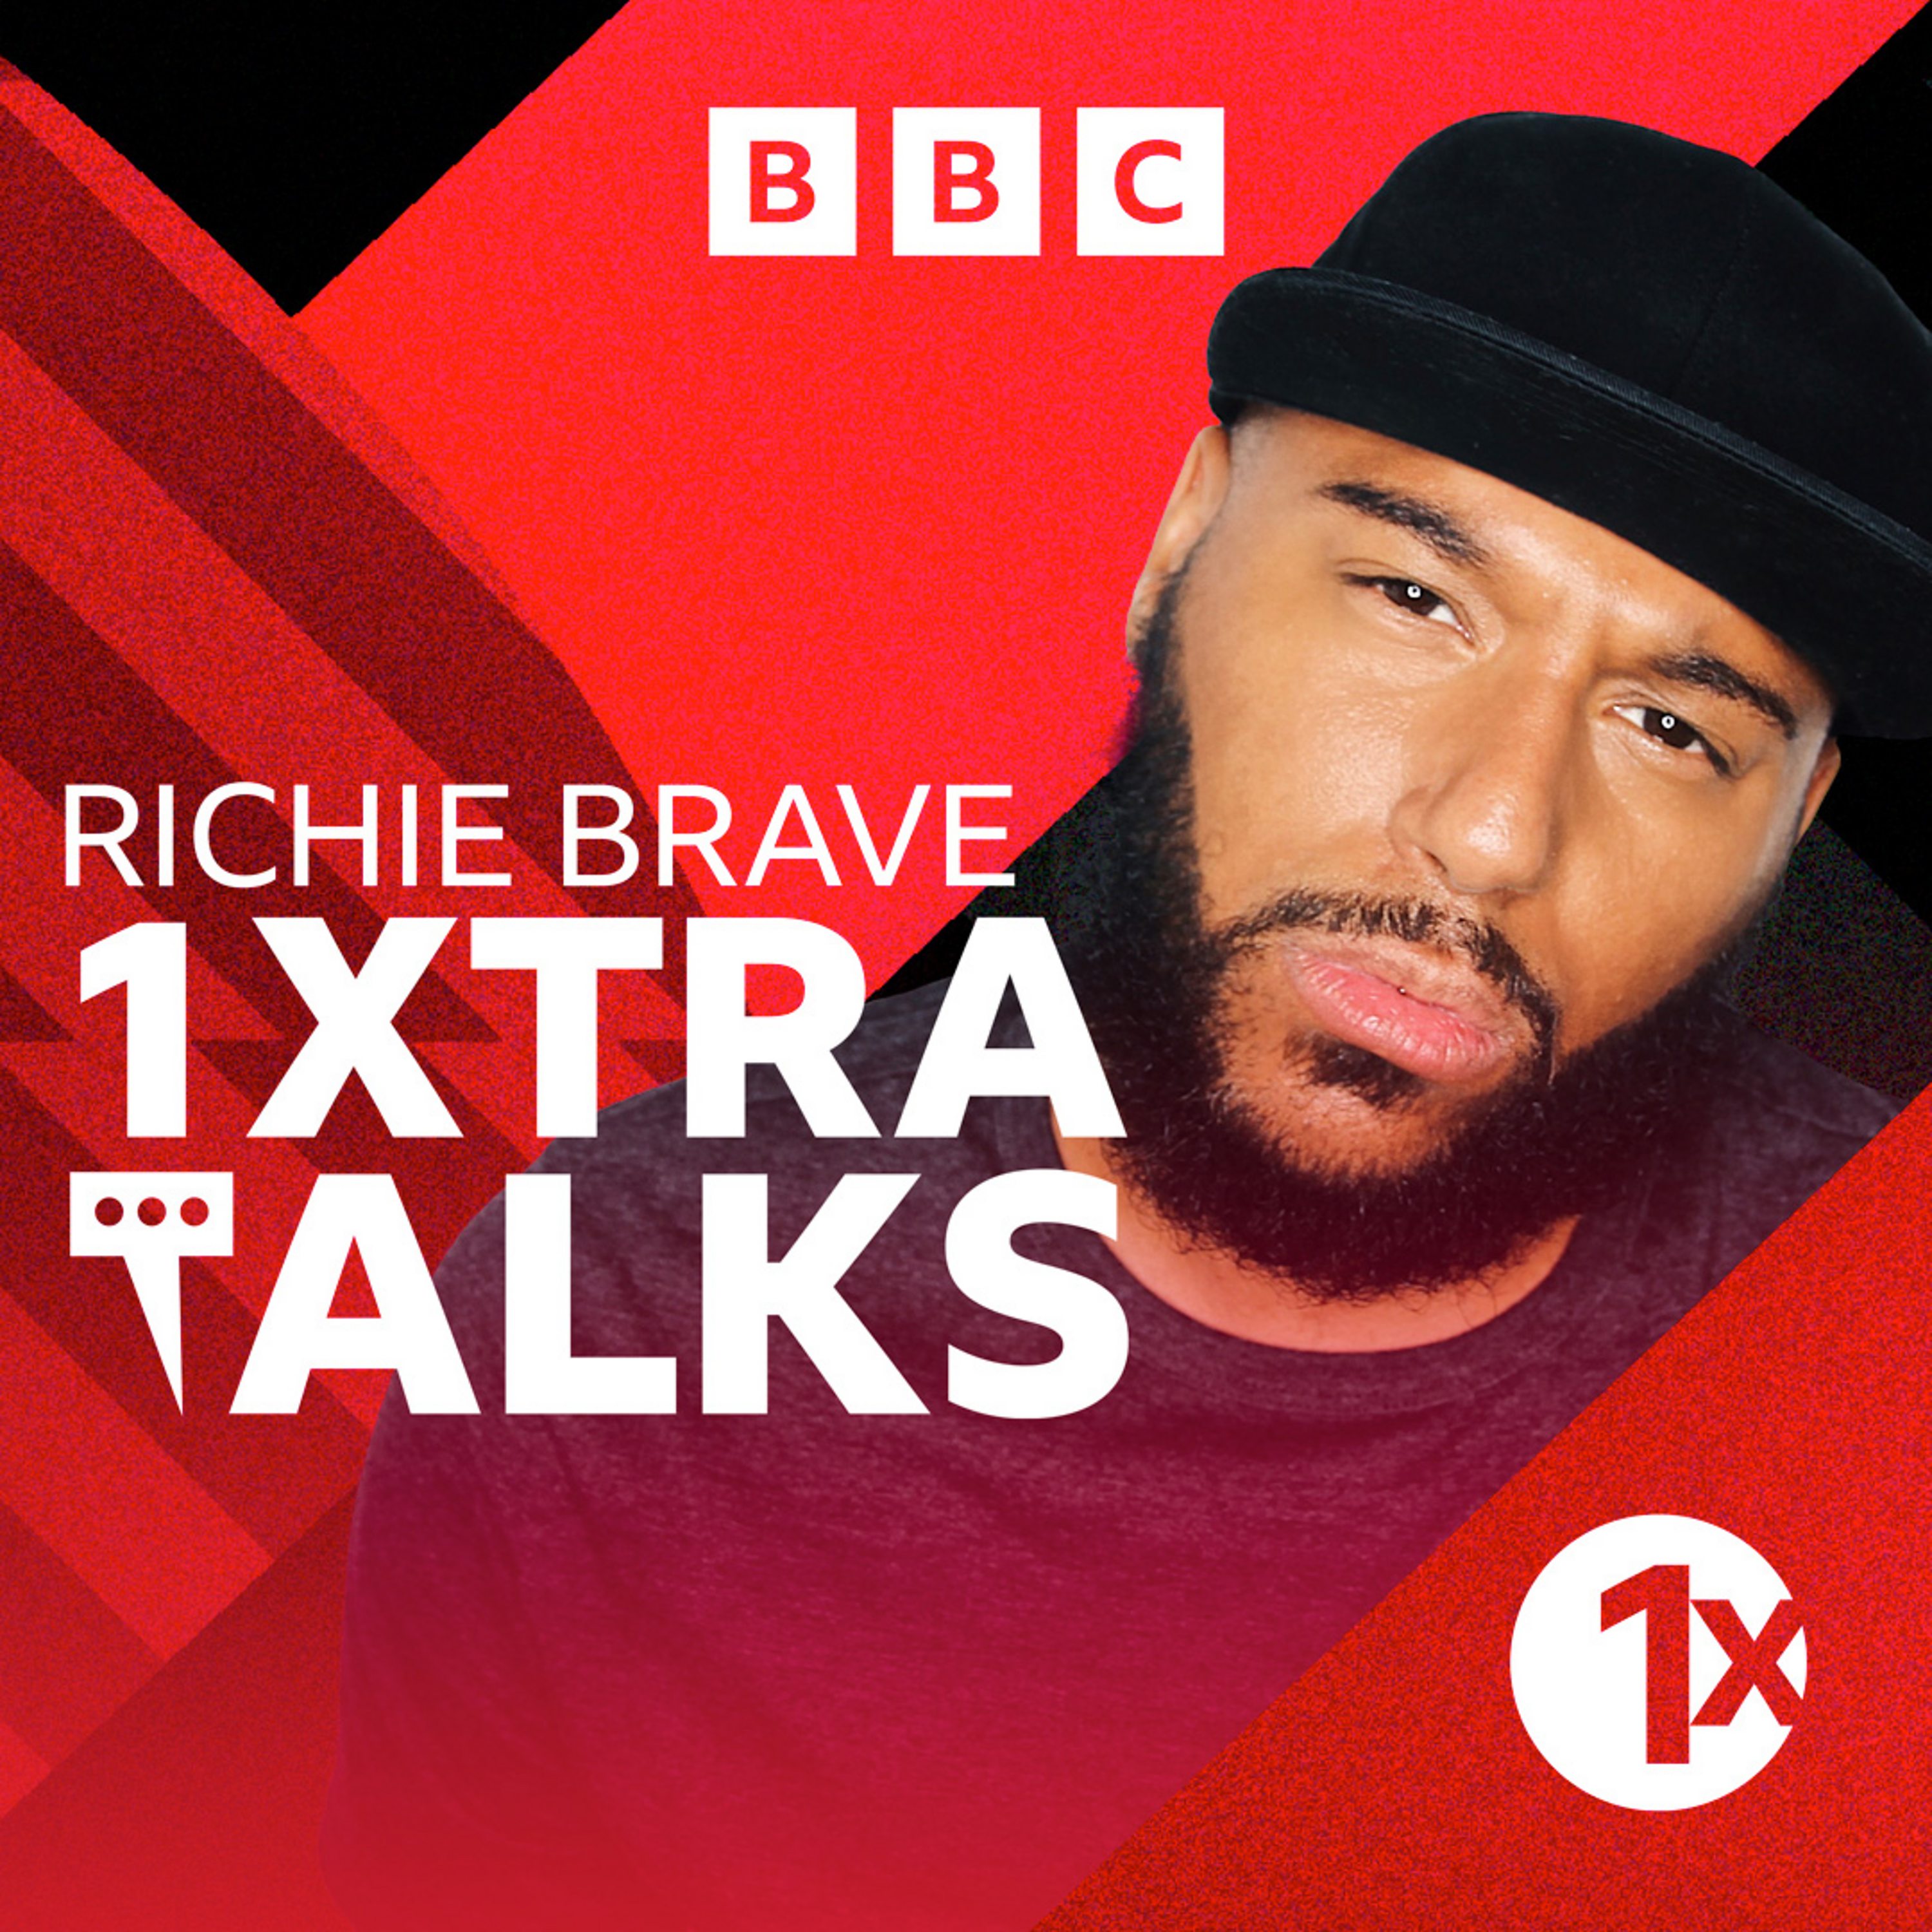 1Xtra Talks with Richie Brave